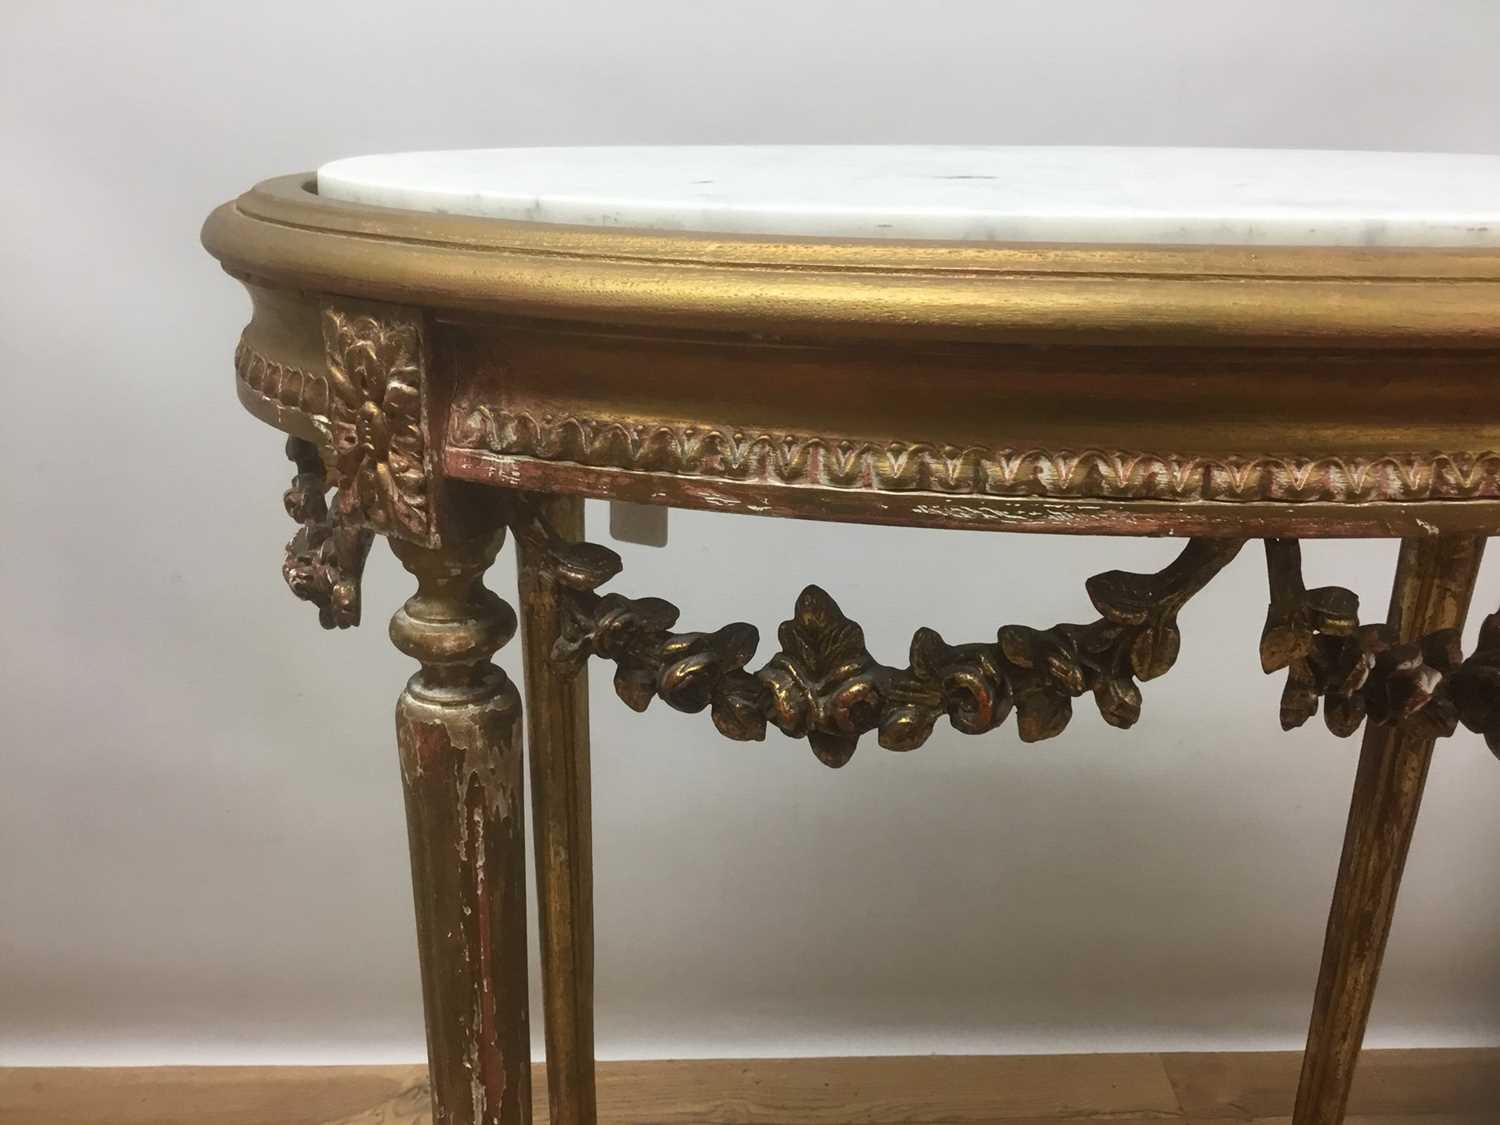 19th century French marble topped gilt wood table - Image 3 of 6